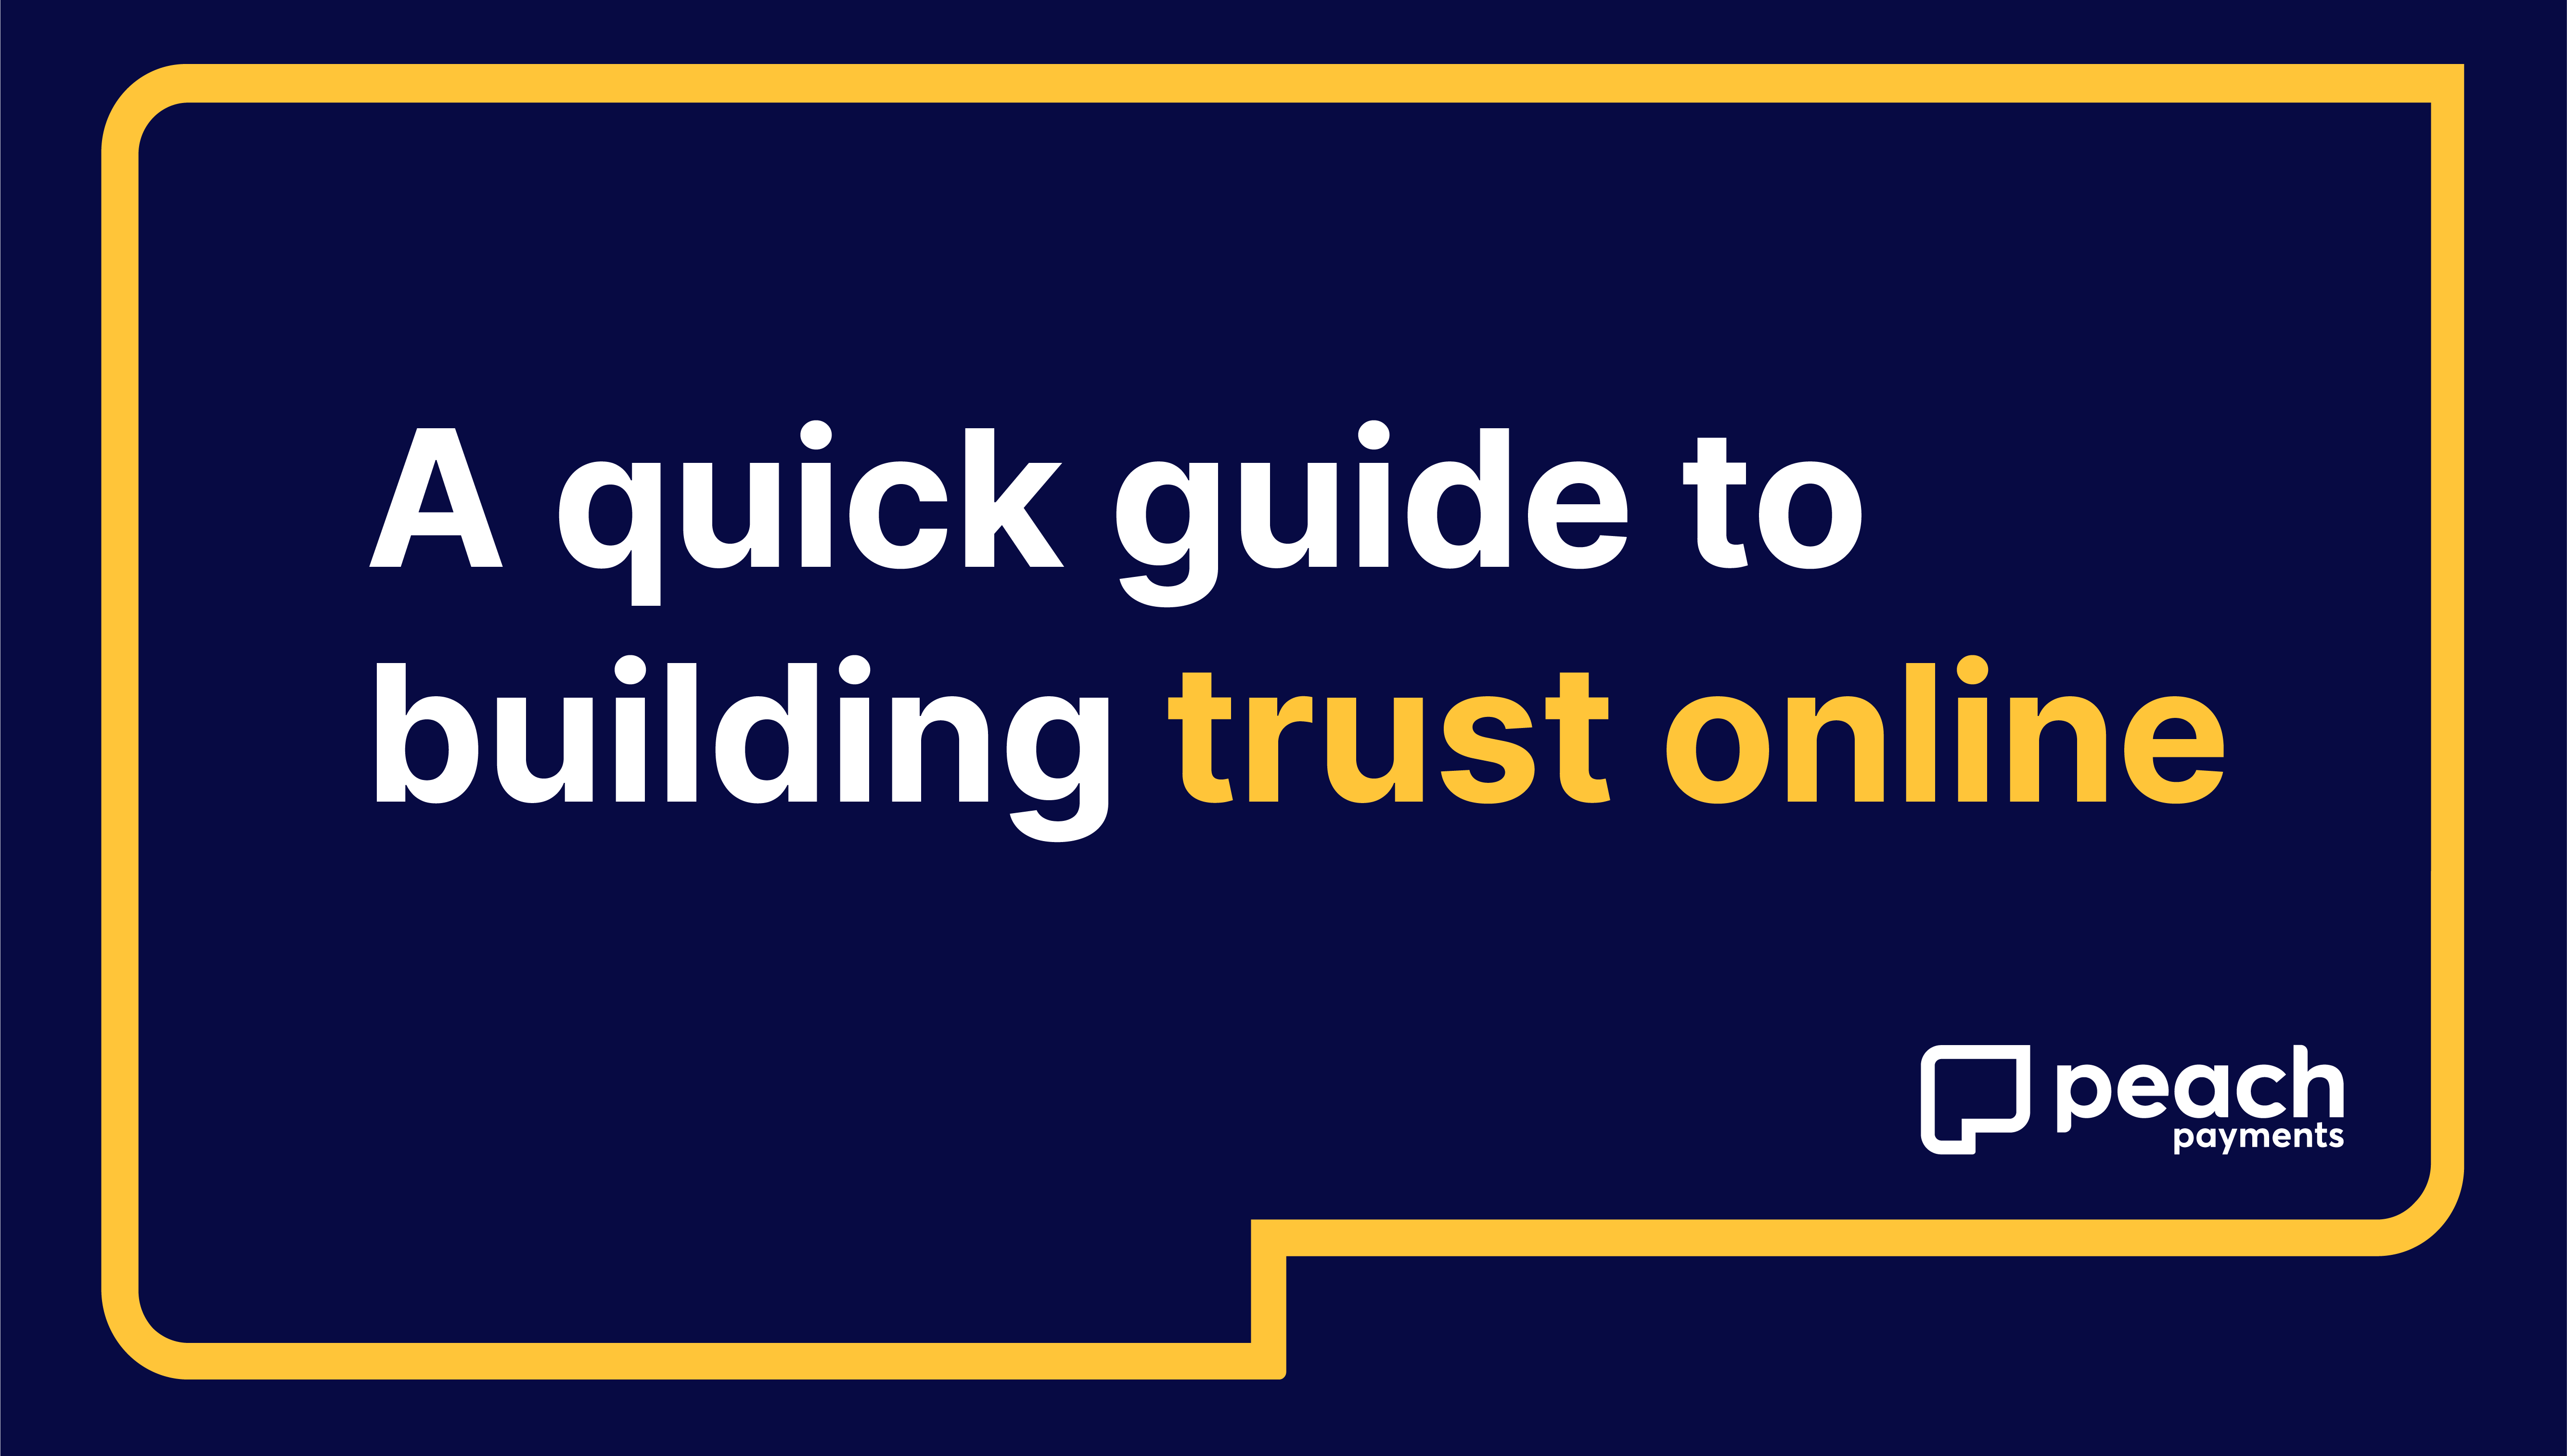 A quick guide to building trust online